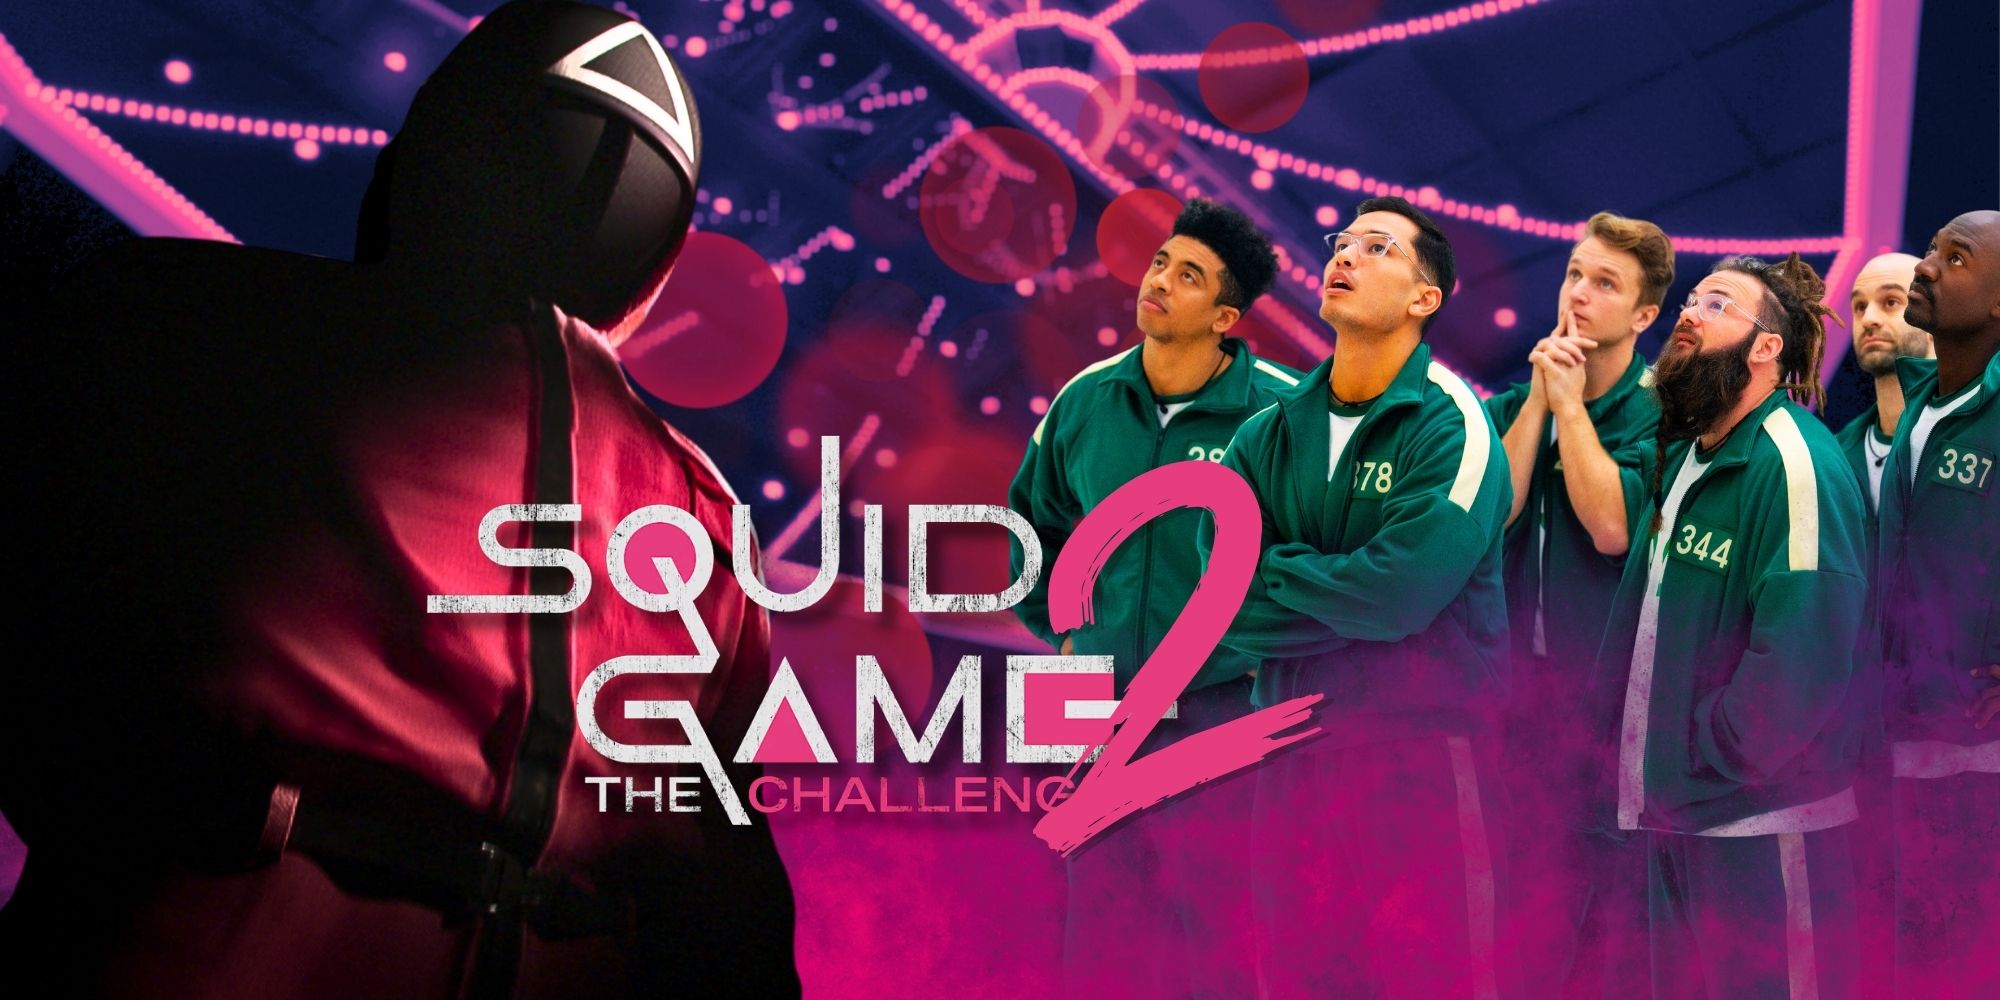 If Squid Game Season 2 Doesn't Happen, That's Fine - GameSpot